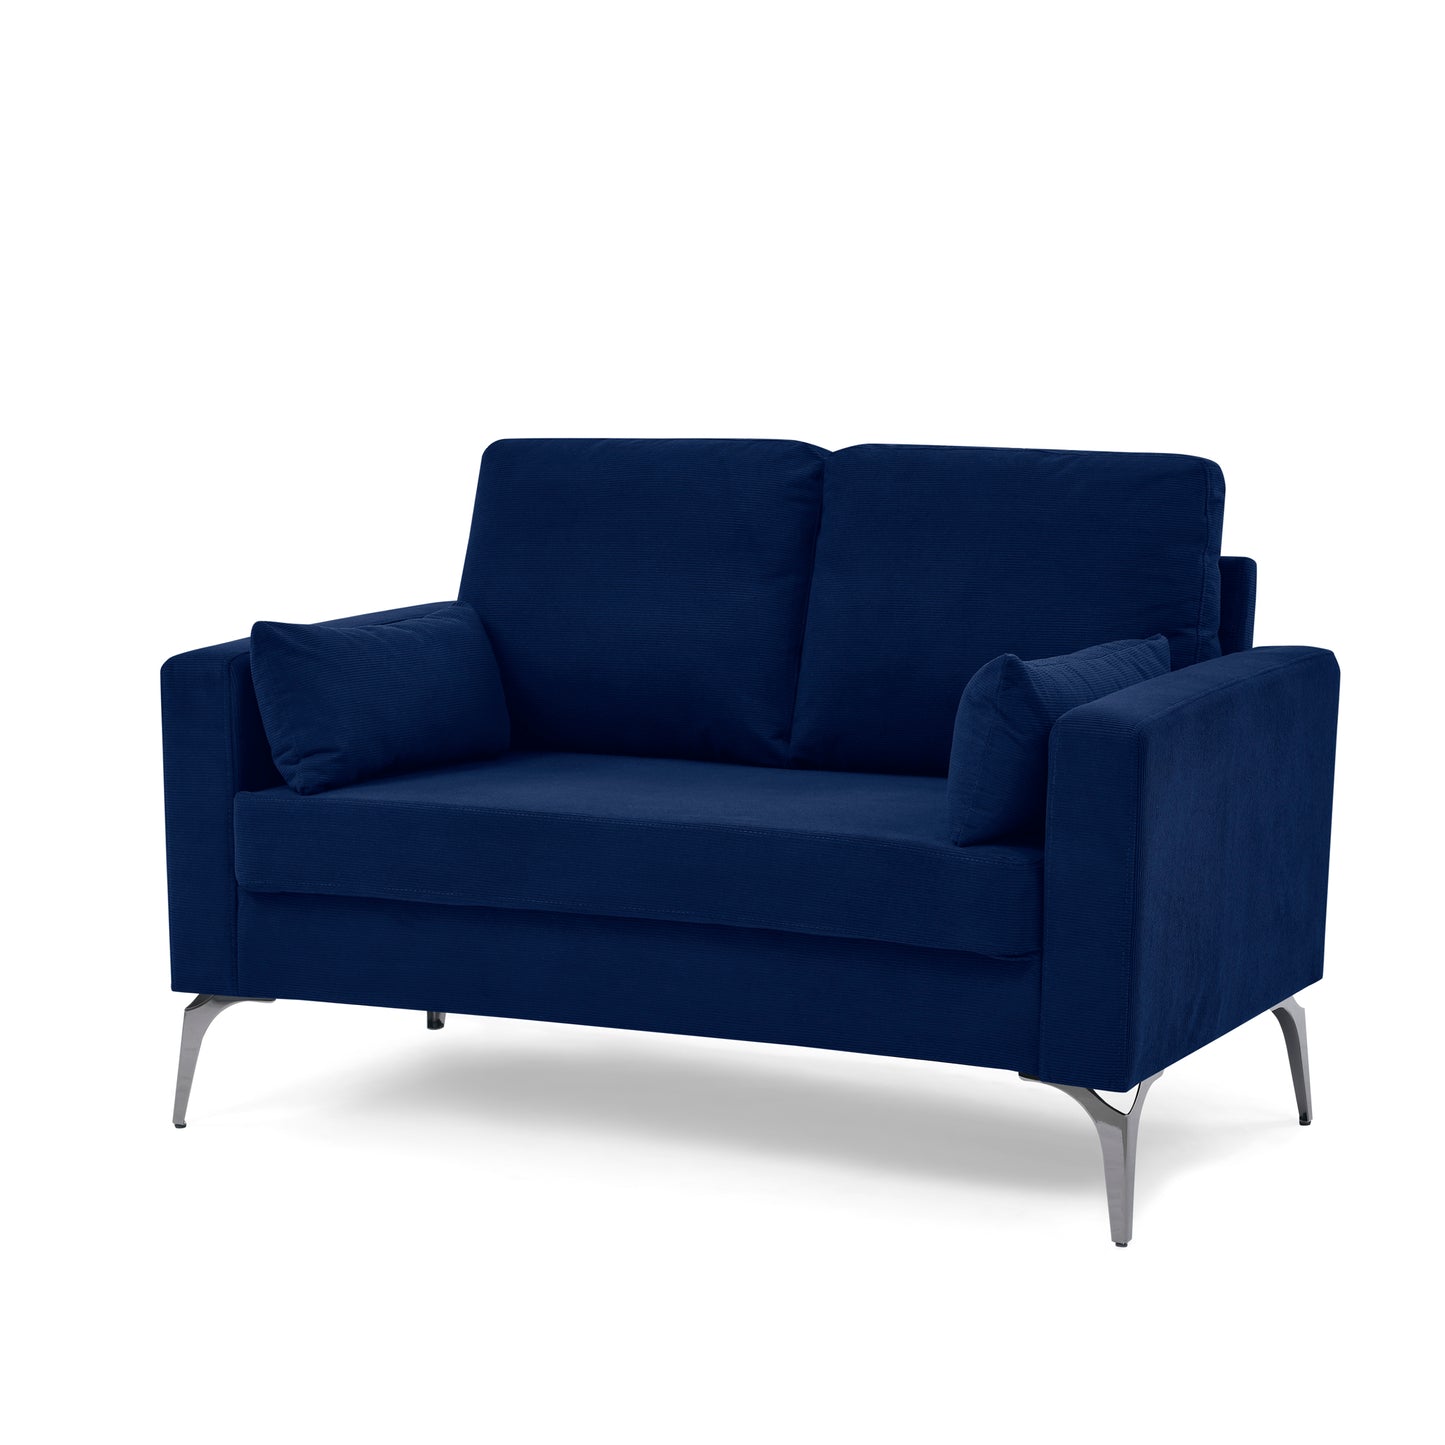 Loveseat Living Room Sofa,with Square Arms and Tight Back, with Two Small Pillows,Corduroy Navy